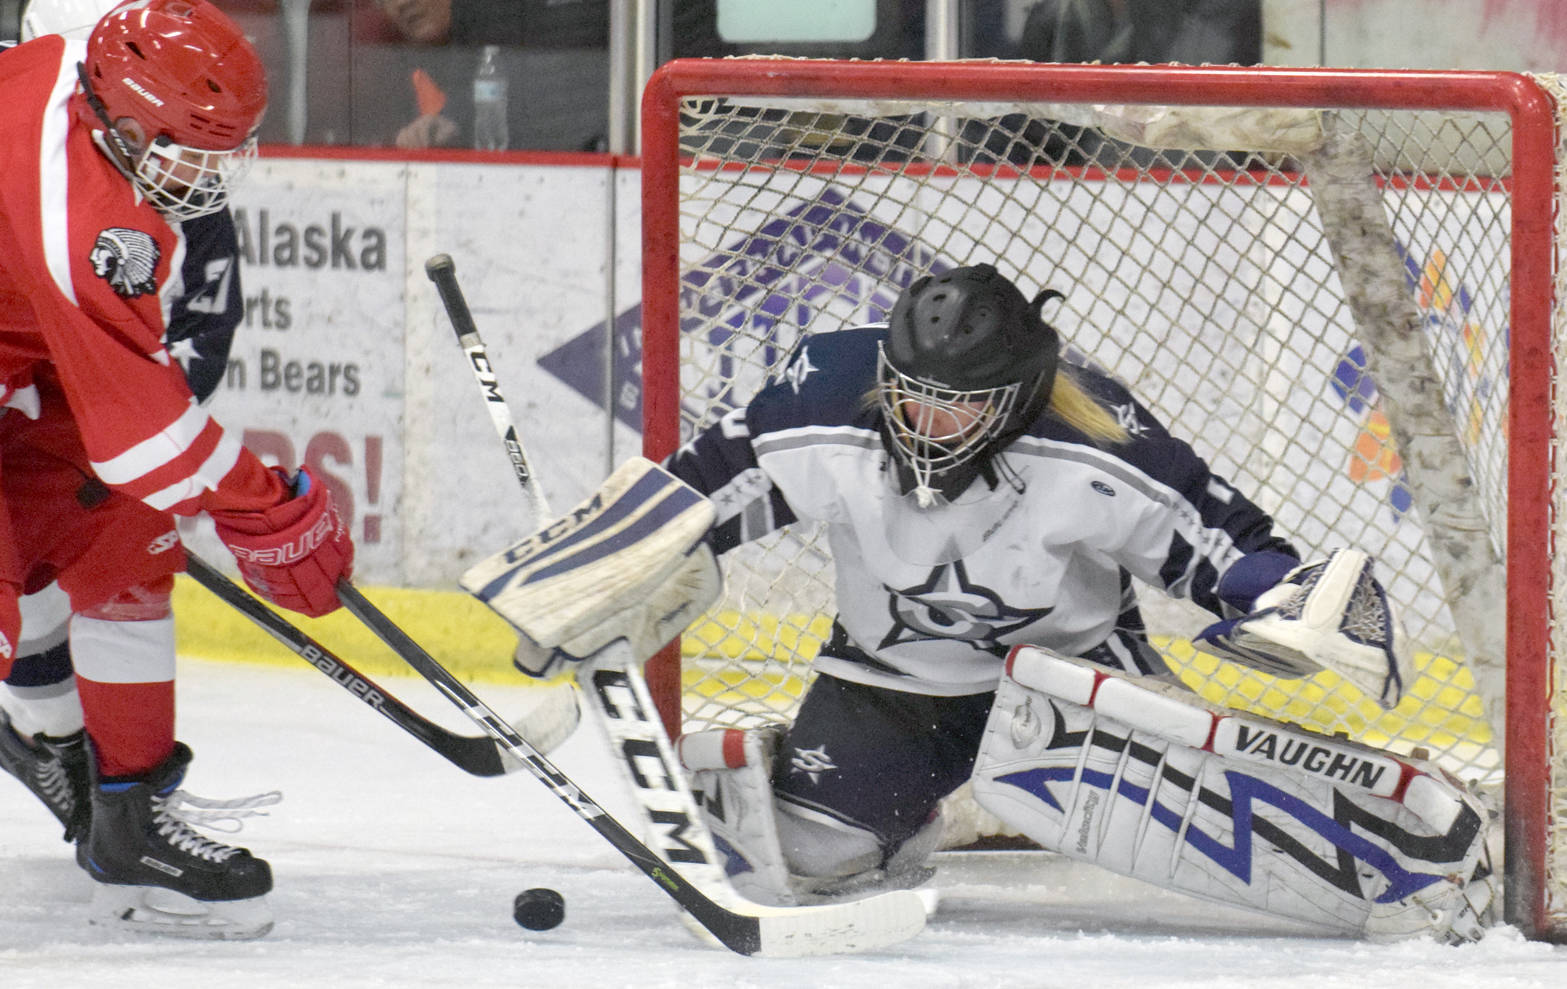 Soldotna’s McKenzie Powell makes a save Friday, Dec. 1, 2017, at the Soldotna Regional Sports Complex. (Photo by Jeff Helminiak/Peninsula Clarion)